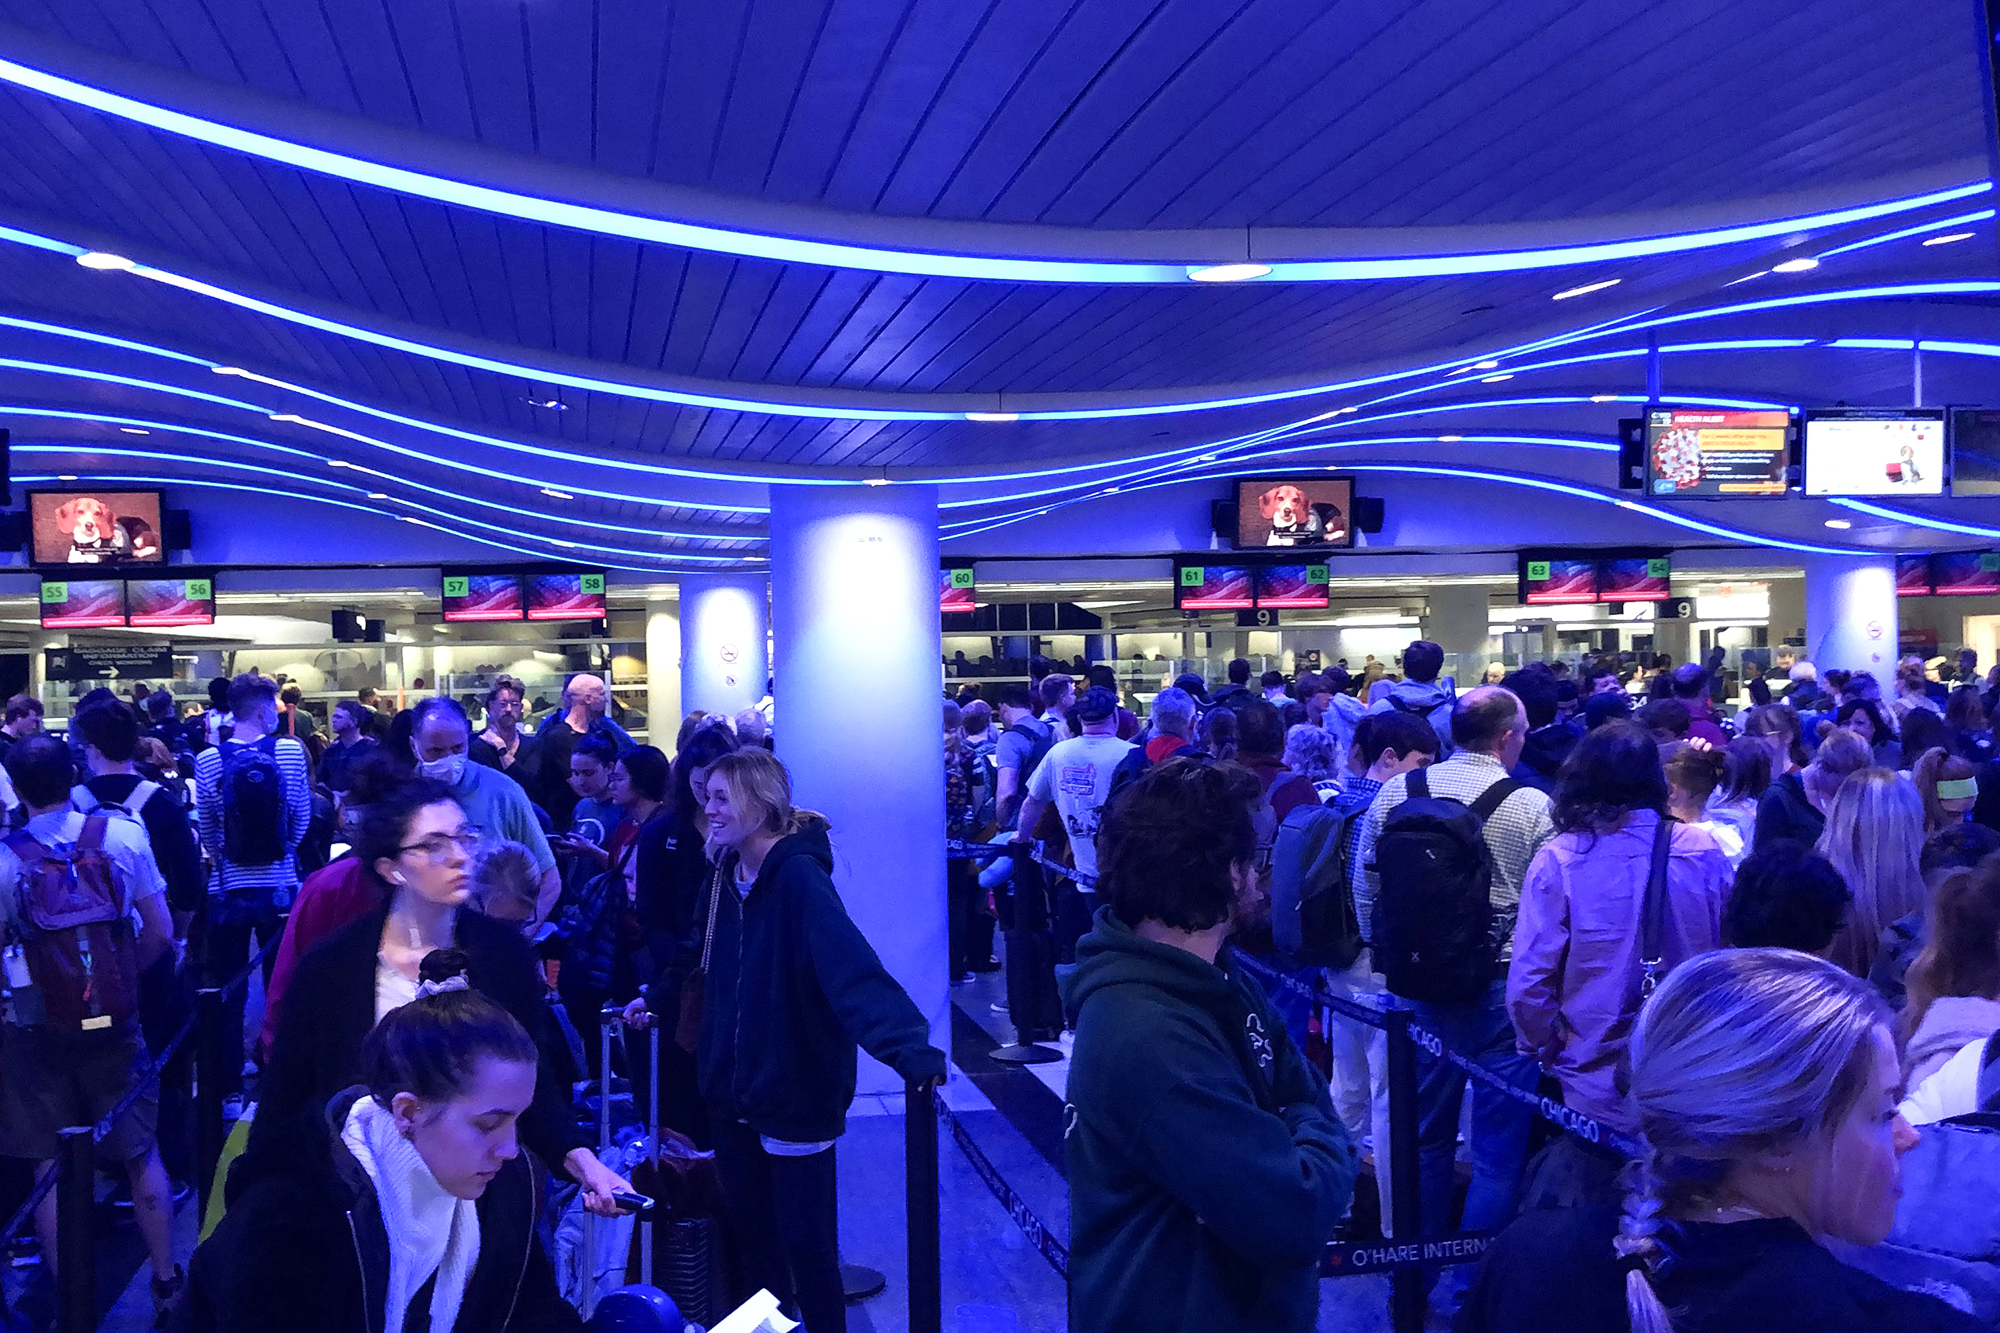 Lines at O'Hare International Airport as people try to come into the U.S. amid the coronavirus pandemic.